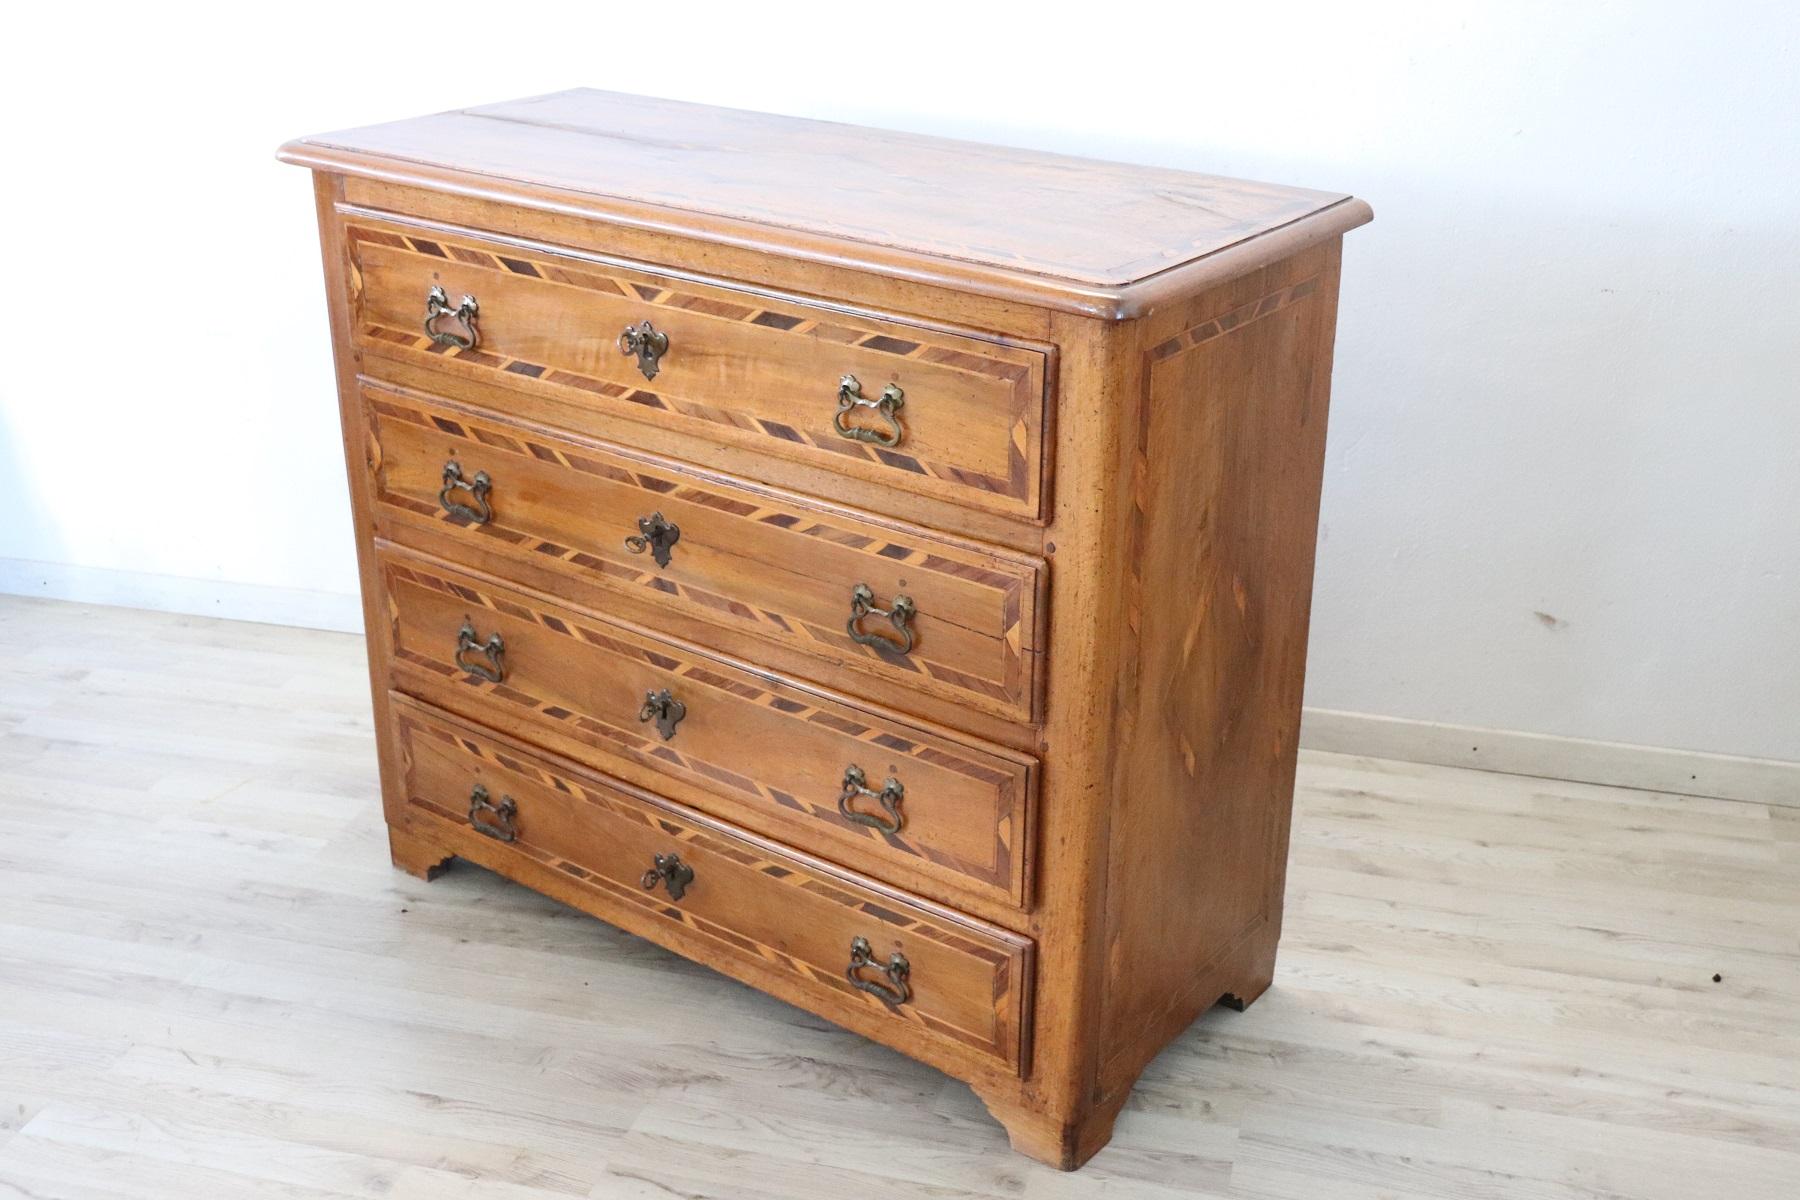 Important antique Italian Louis XIV chest of drawers 1680s walnut wood. Inlaid decoration of geometric taste. On the front the drawers are decorated with small pieces of different precious woods. On the front four large and useful drawers. In the